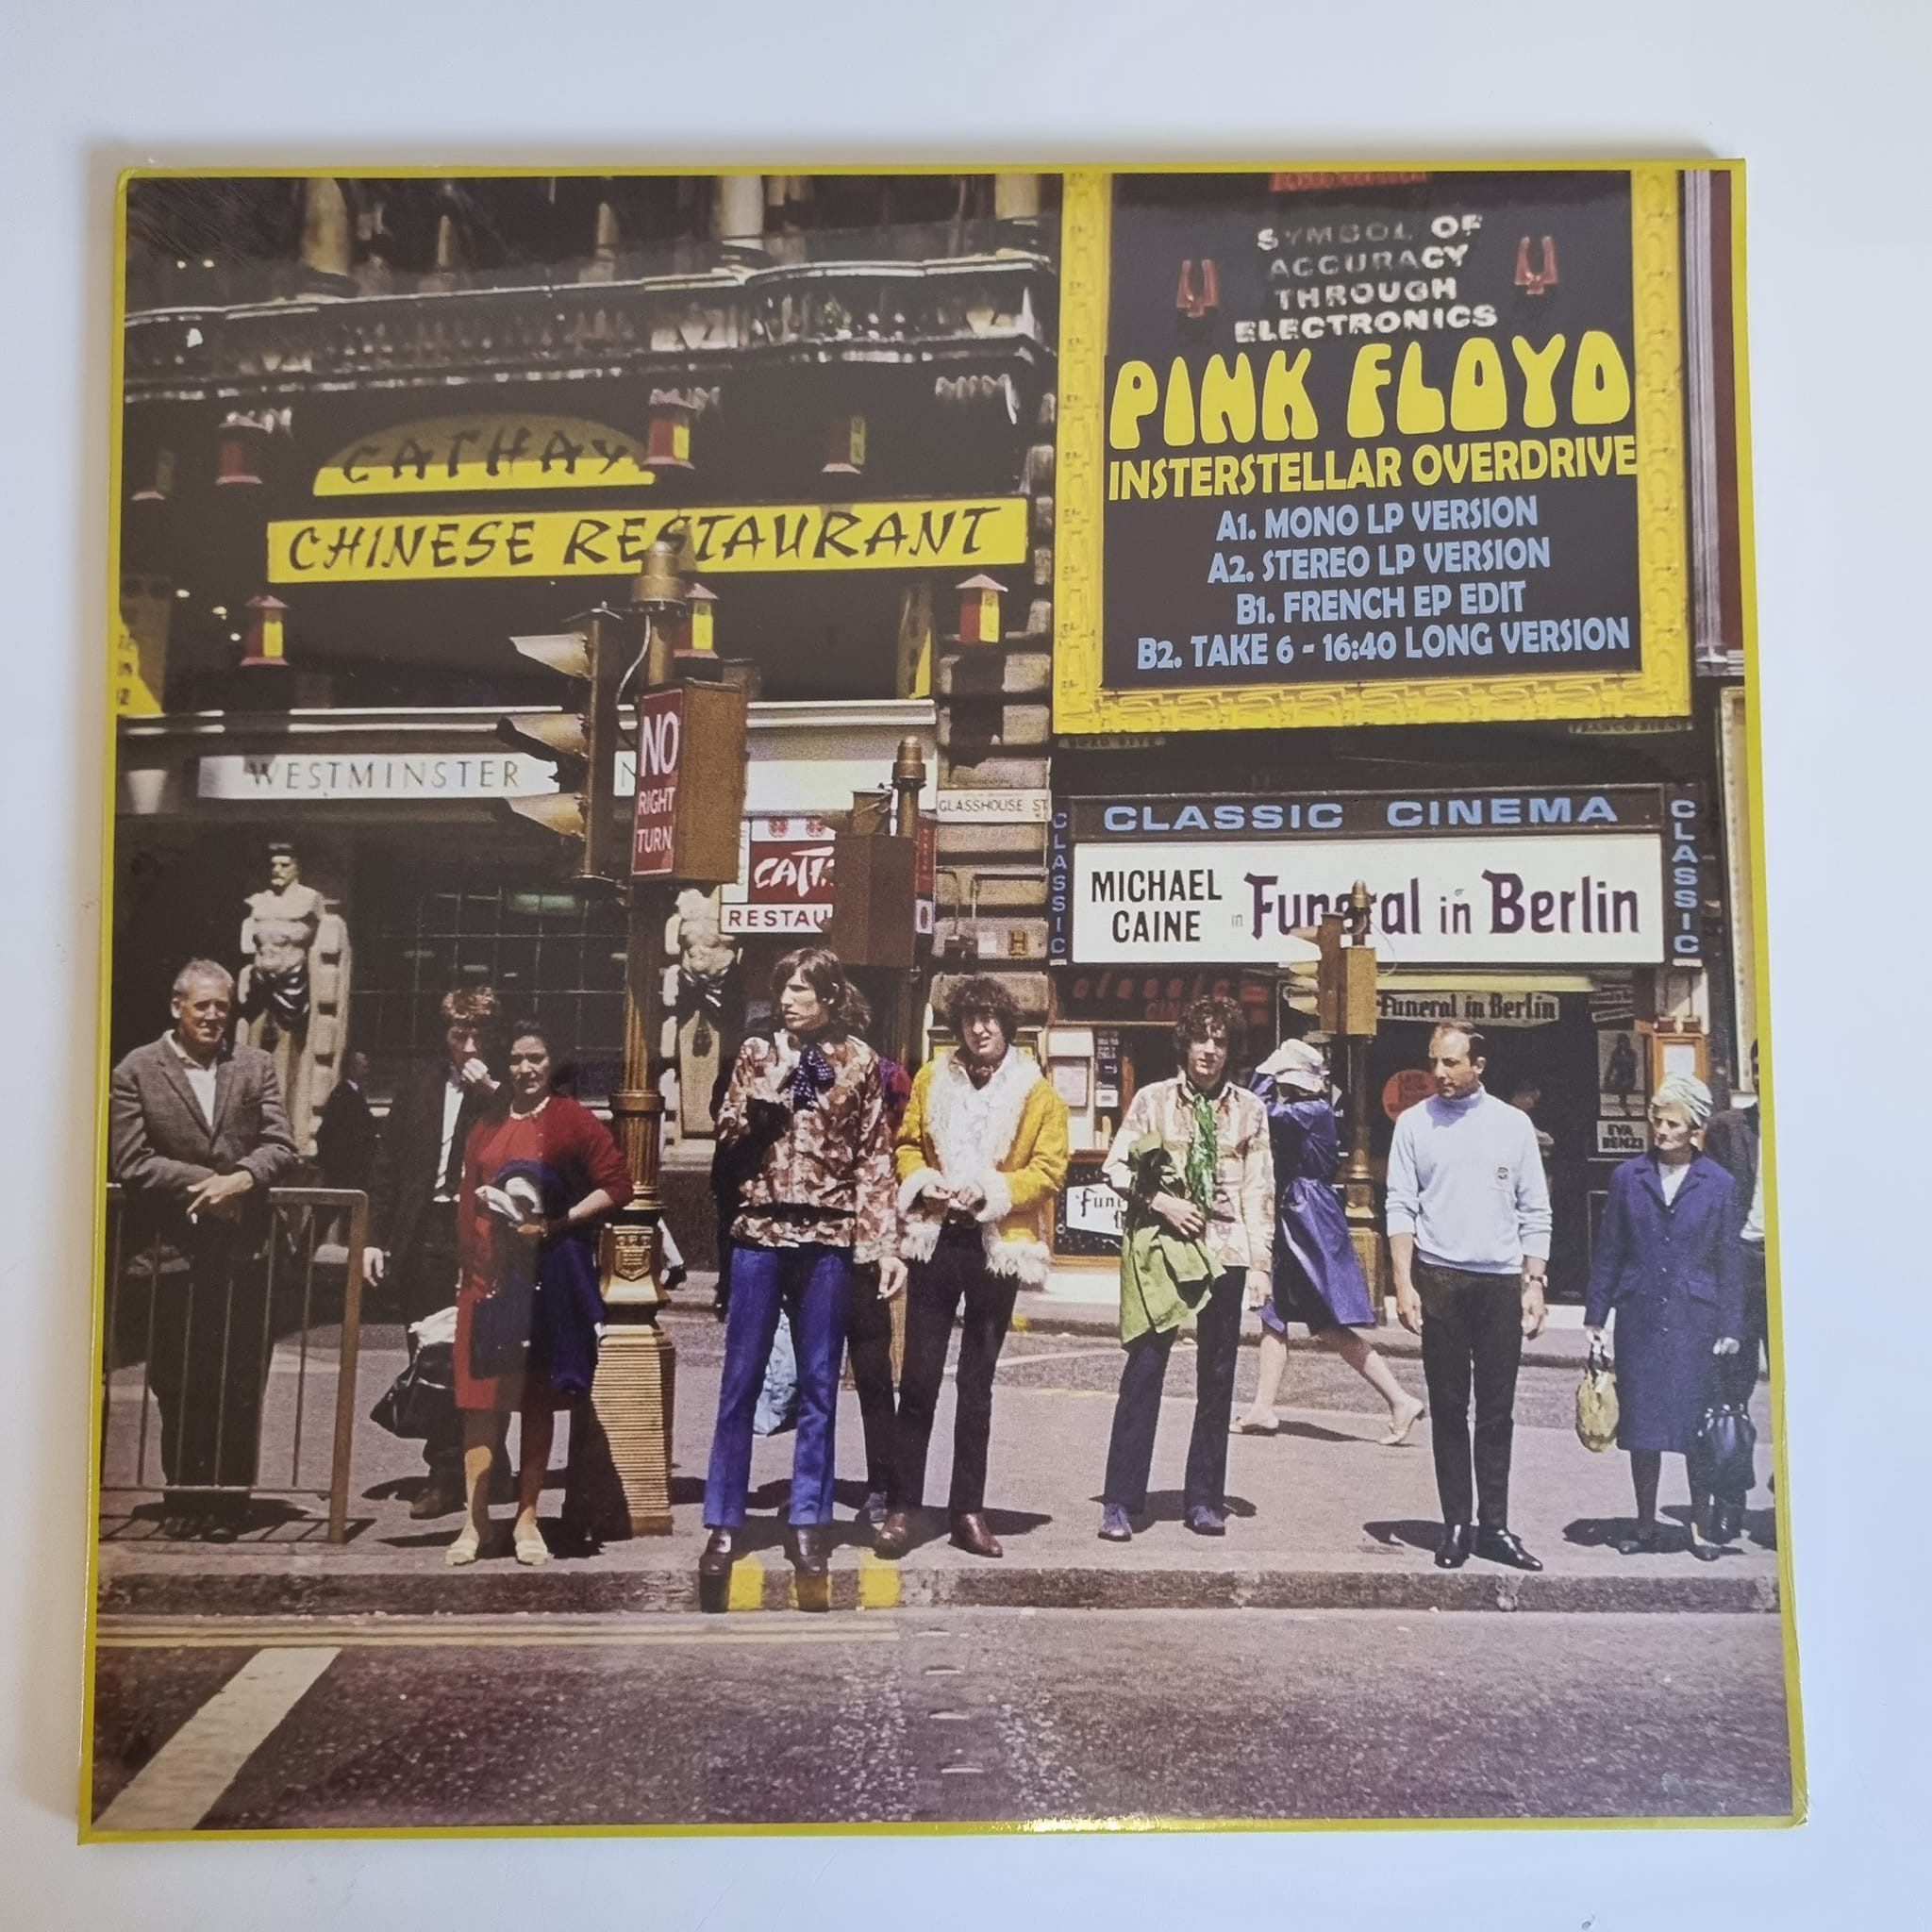 Buy this rare Pink Floyd record by clicking here